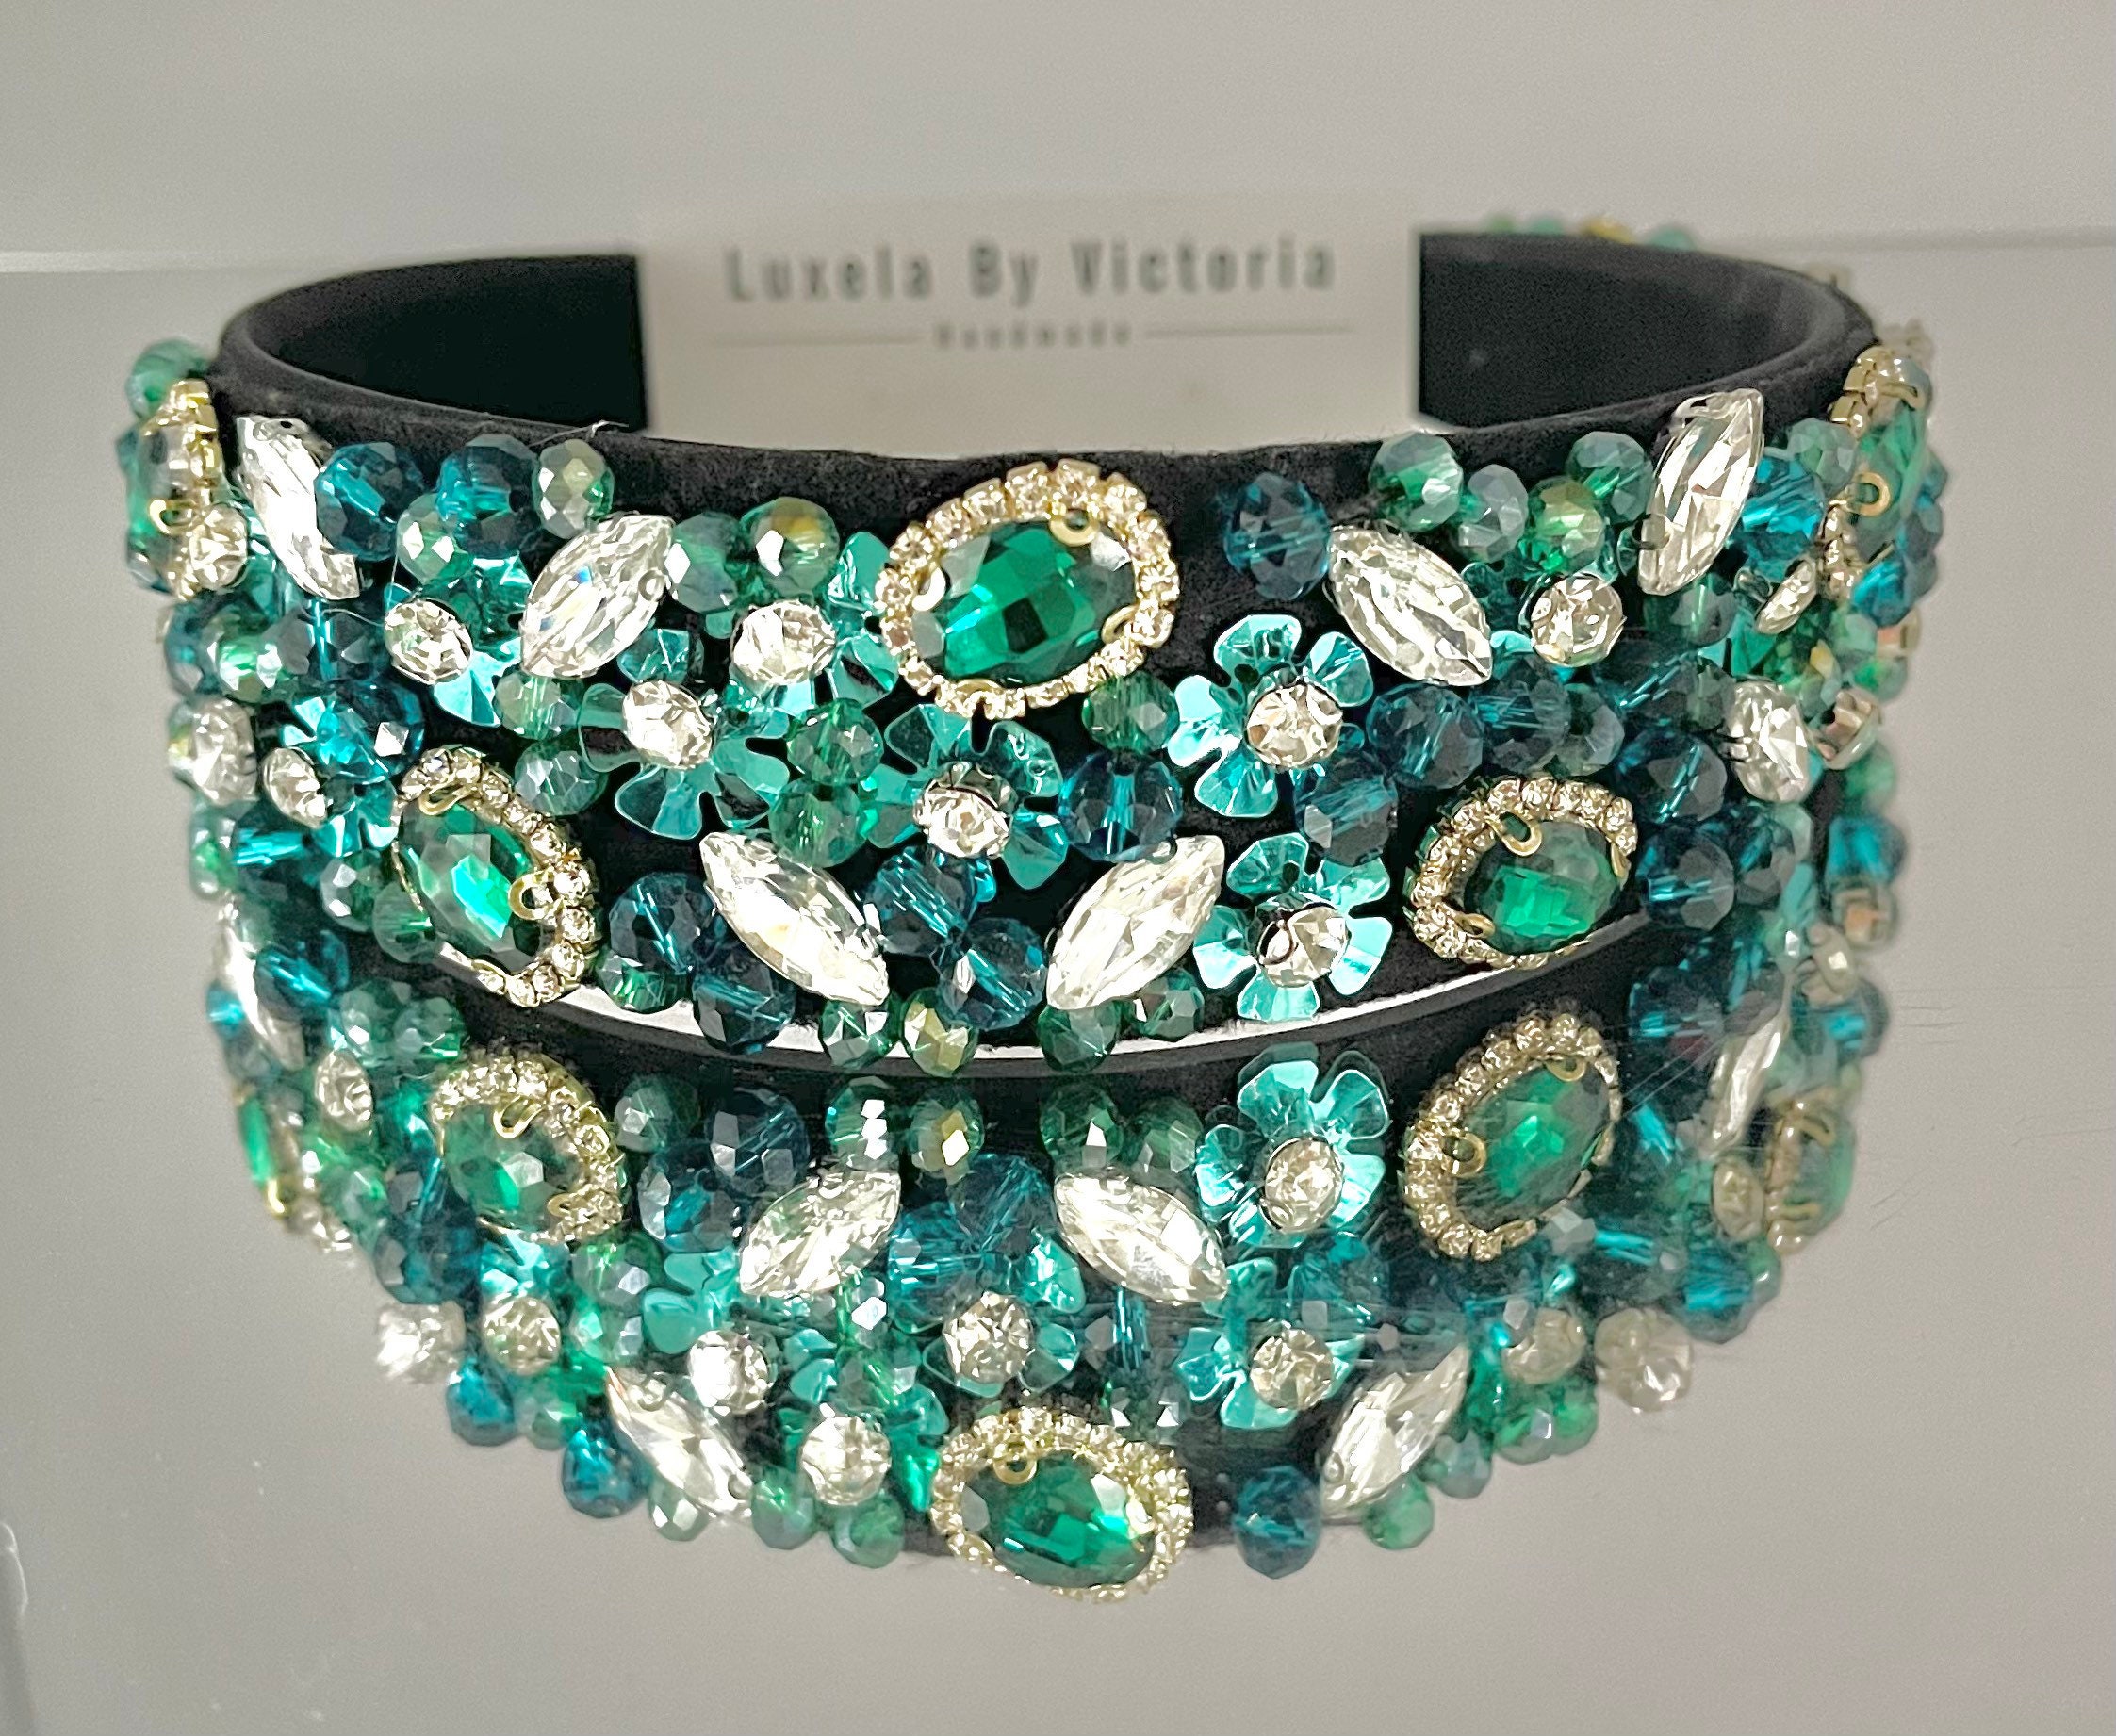 Statement Headband Turquoise Blue and Green Crystal Headband pic pic